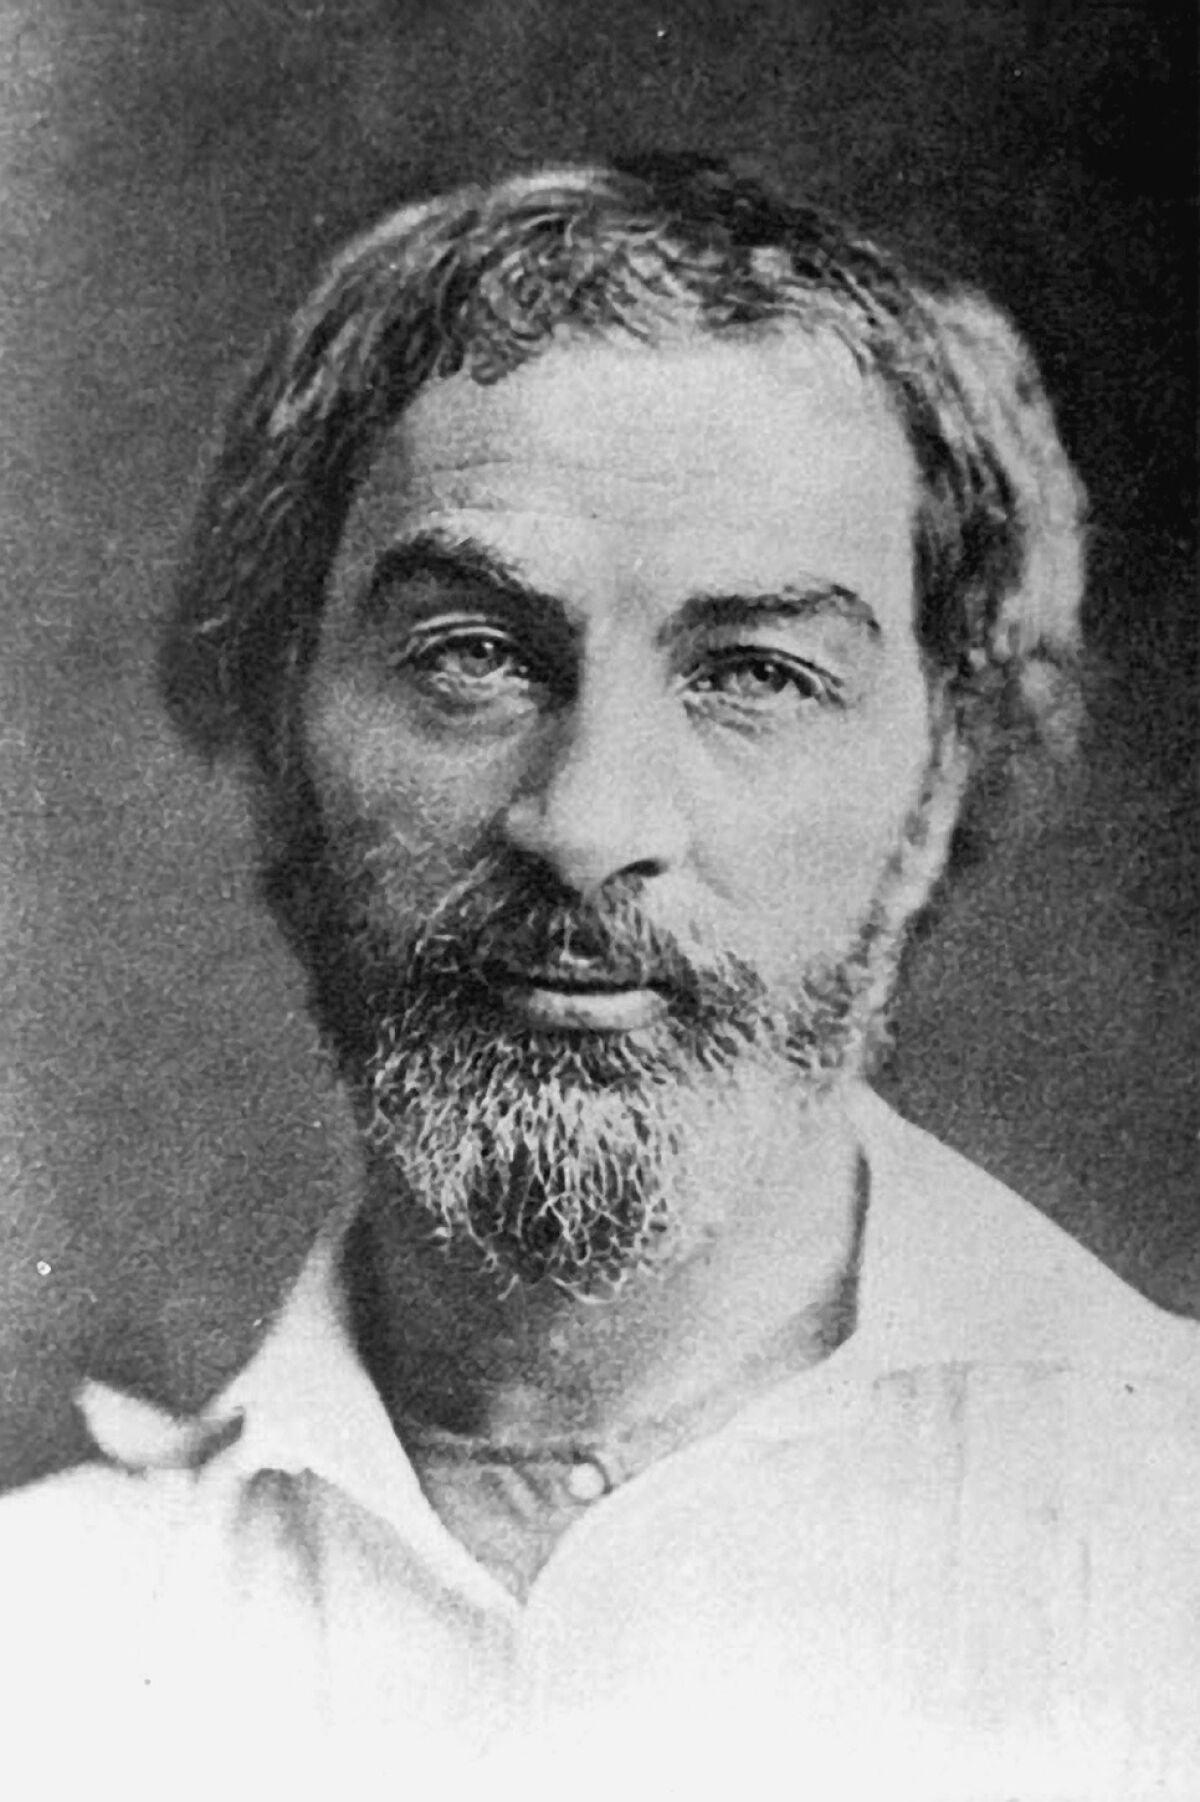 Walt Whitman, the subject (along with author Mark Doty) of "What Is the Grass?"